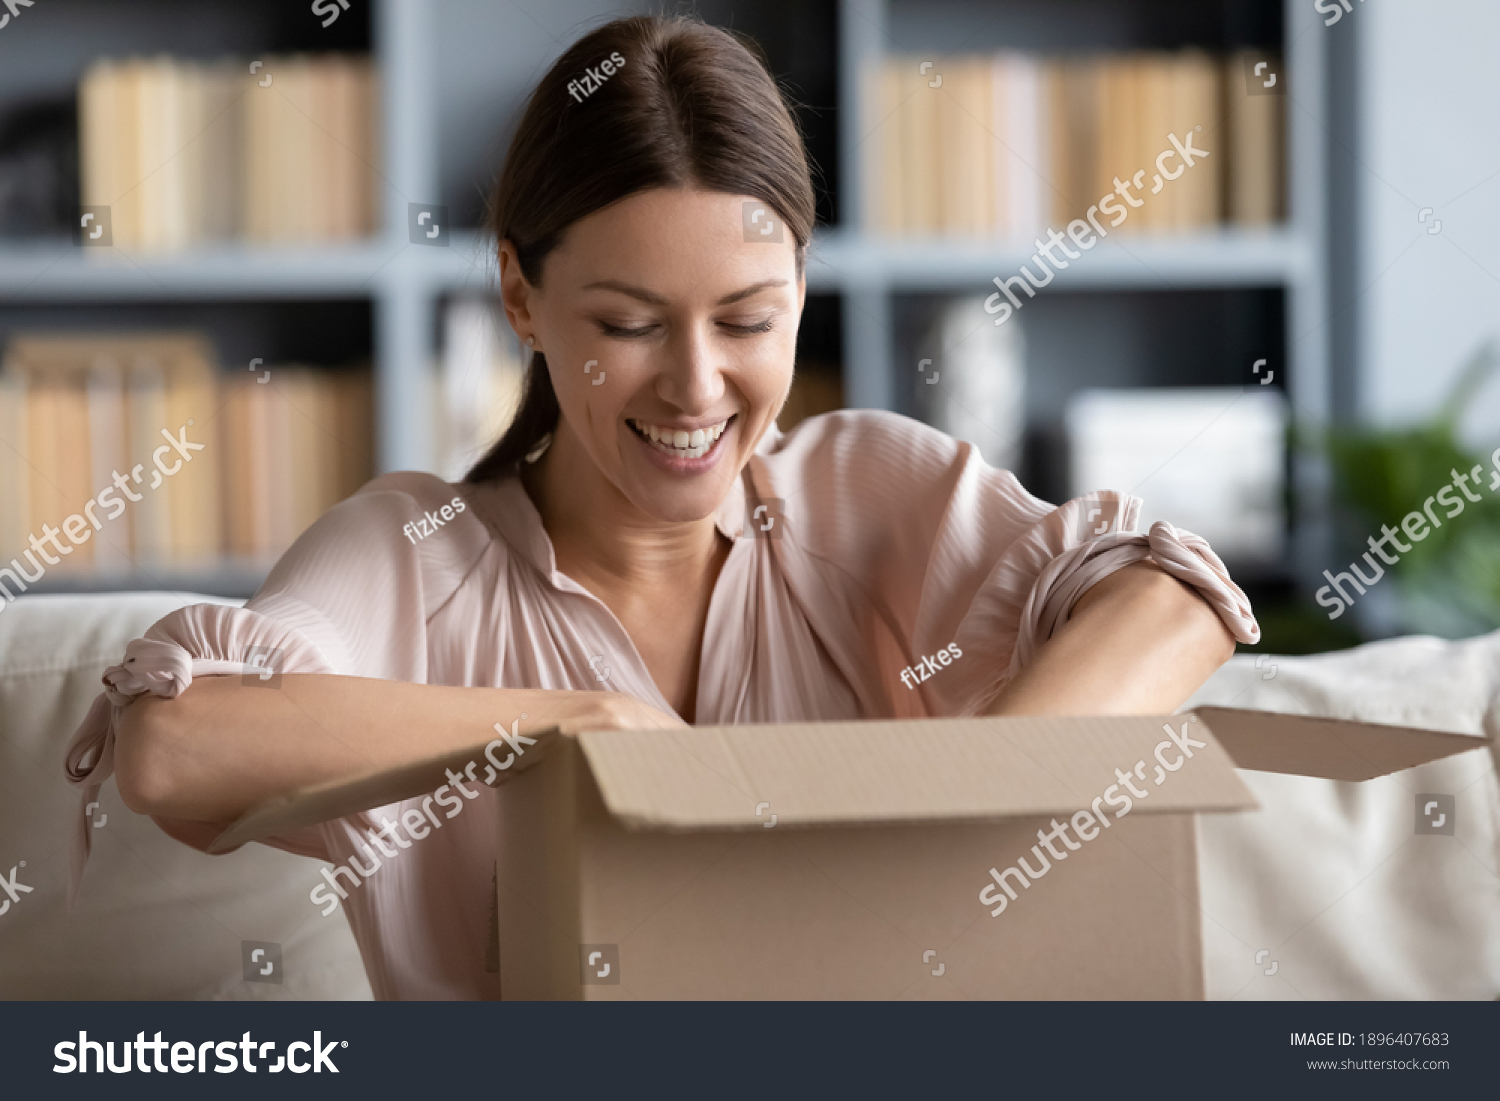 Close up overjoyed young woman unpacking cardboard box at home, satisfied customer received awaited parcel with online store order, sitting on couch, good quick delivery service concept #1896407683